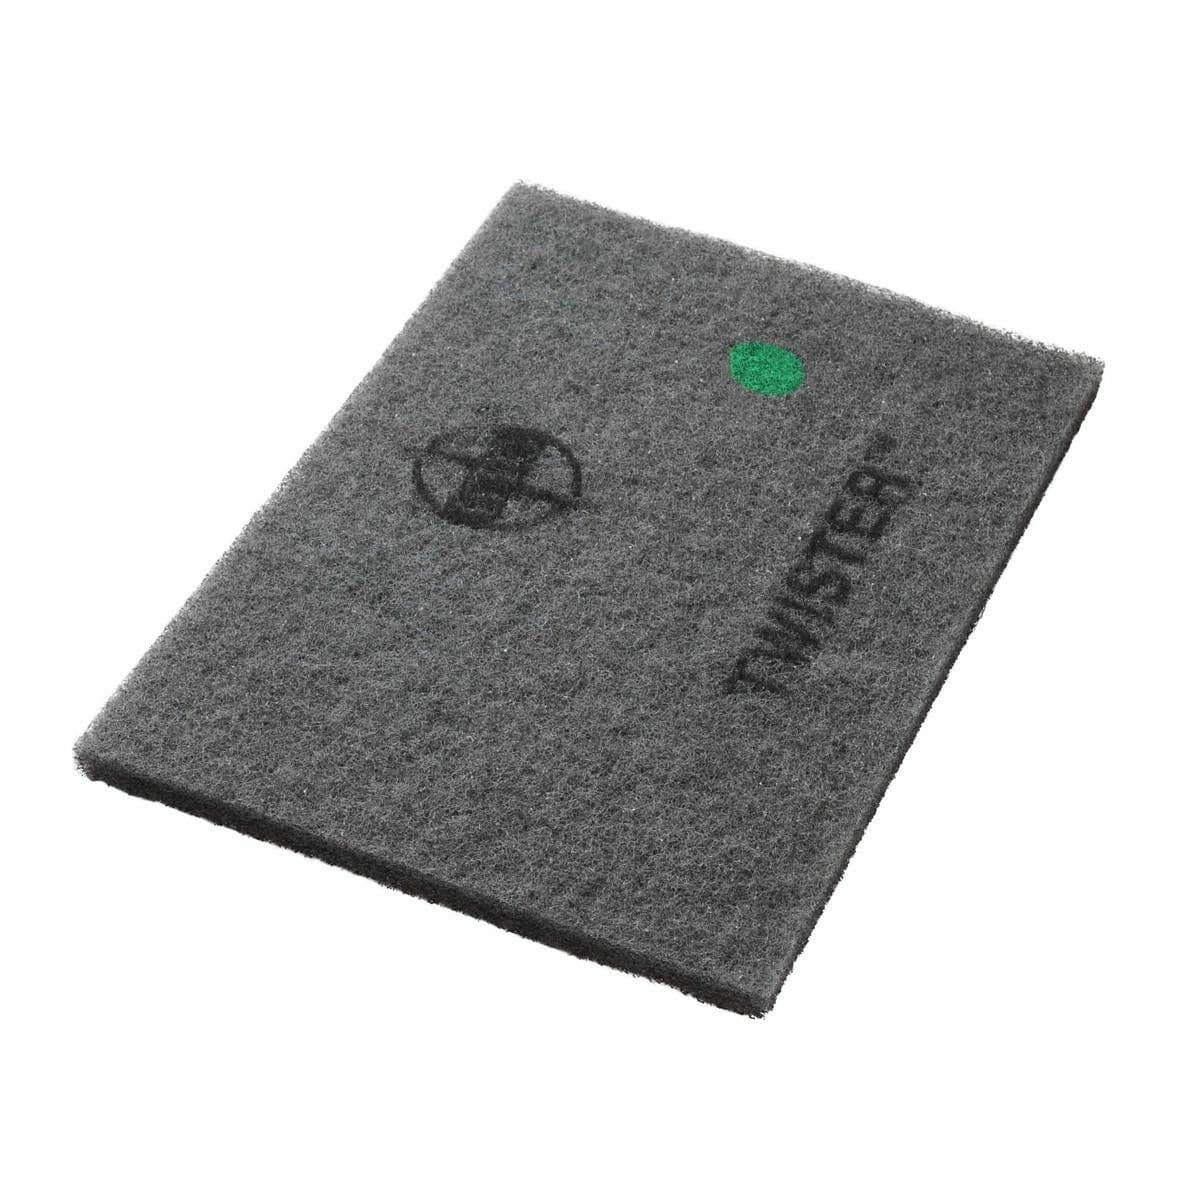 Twister Rectangular Pads - Green - Twister Cleaning Technology